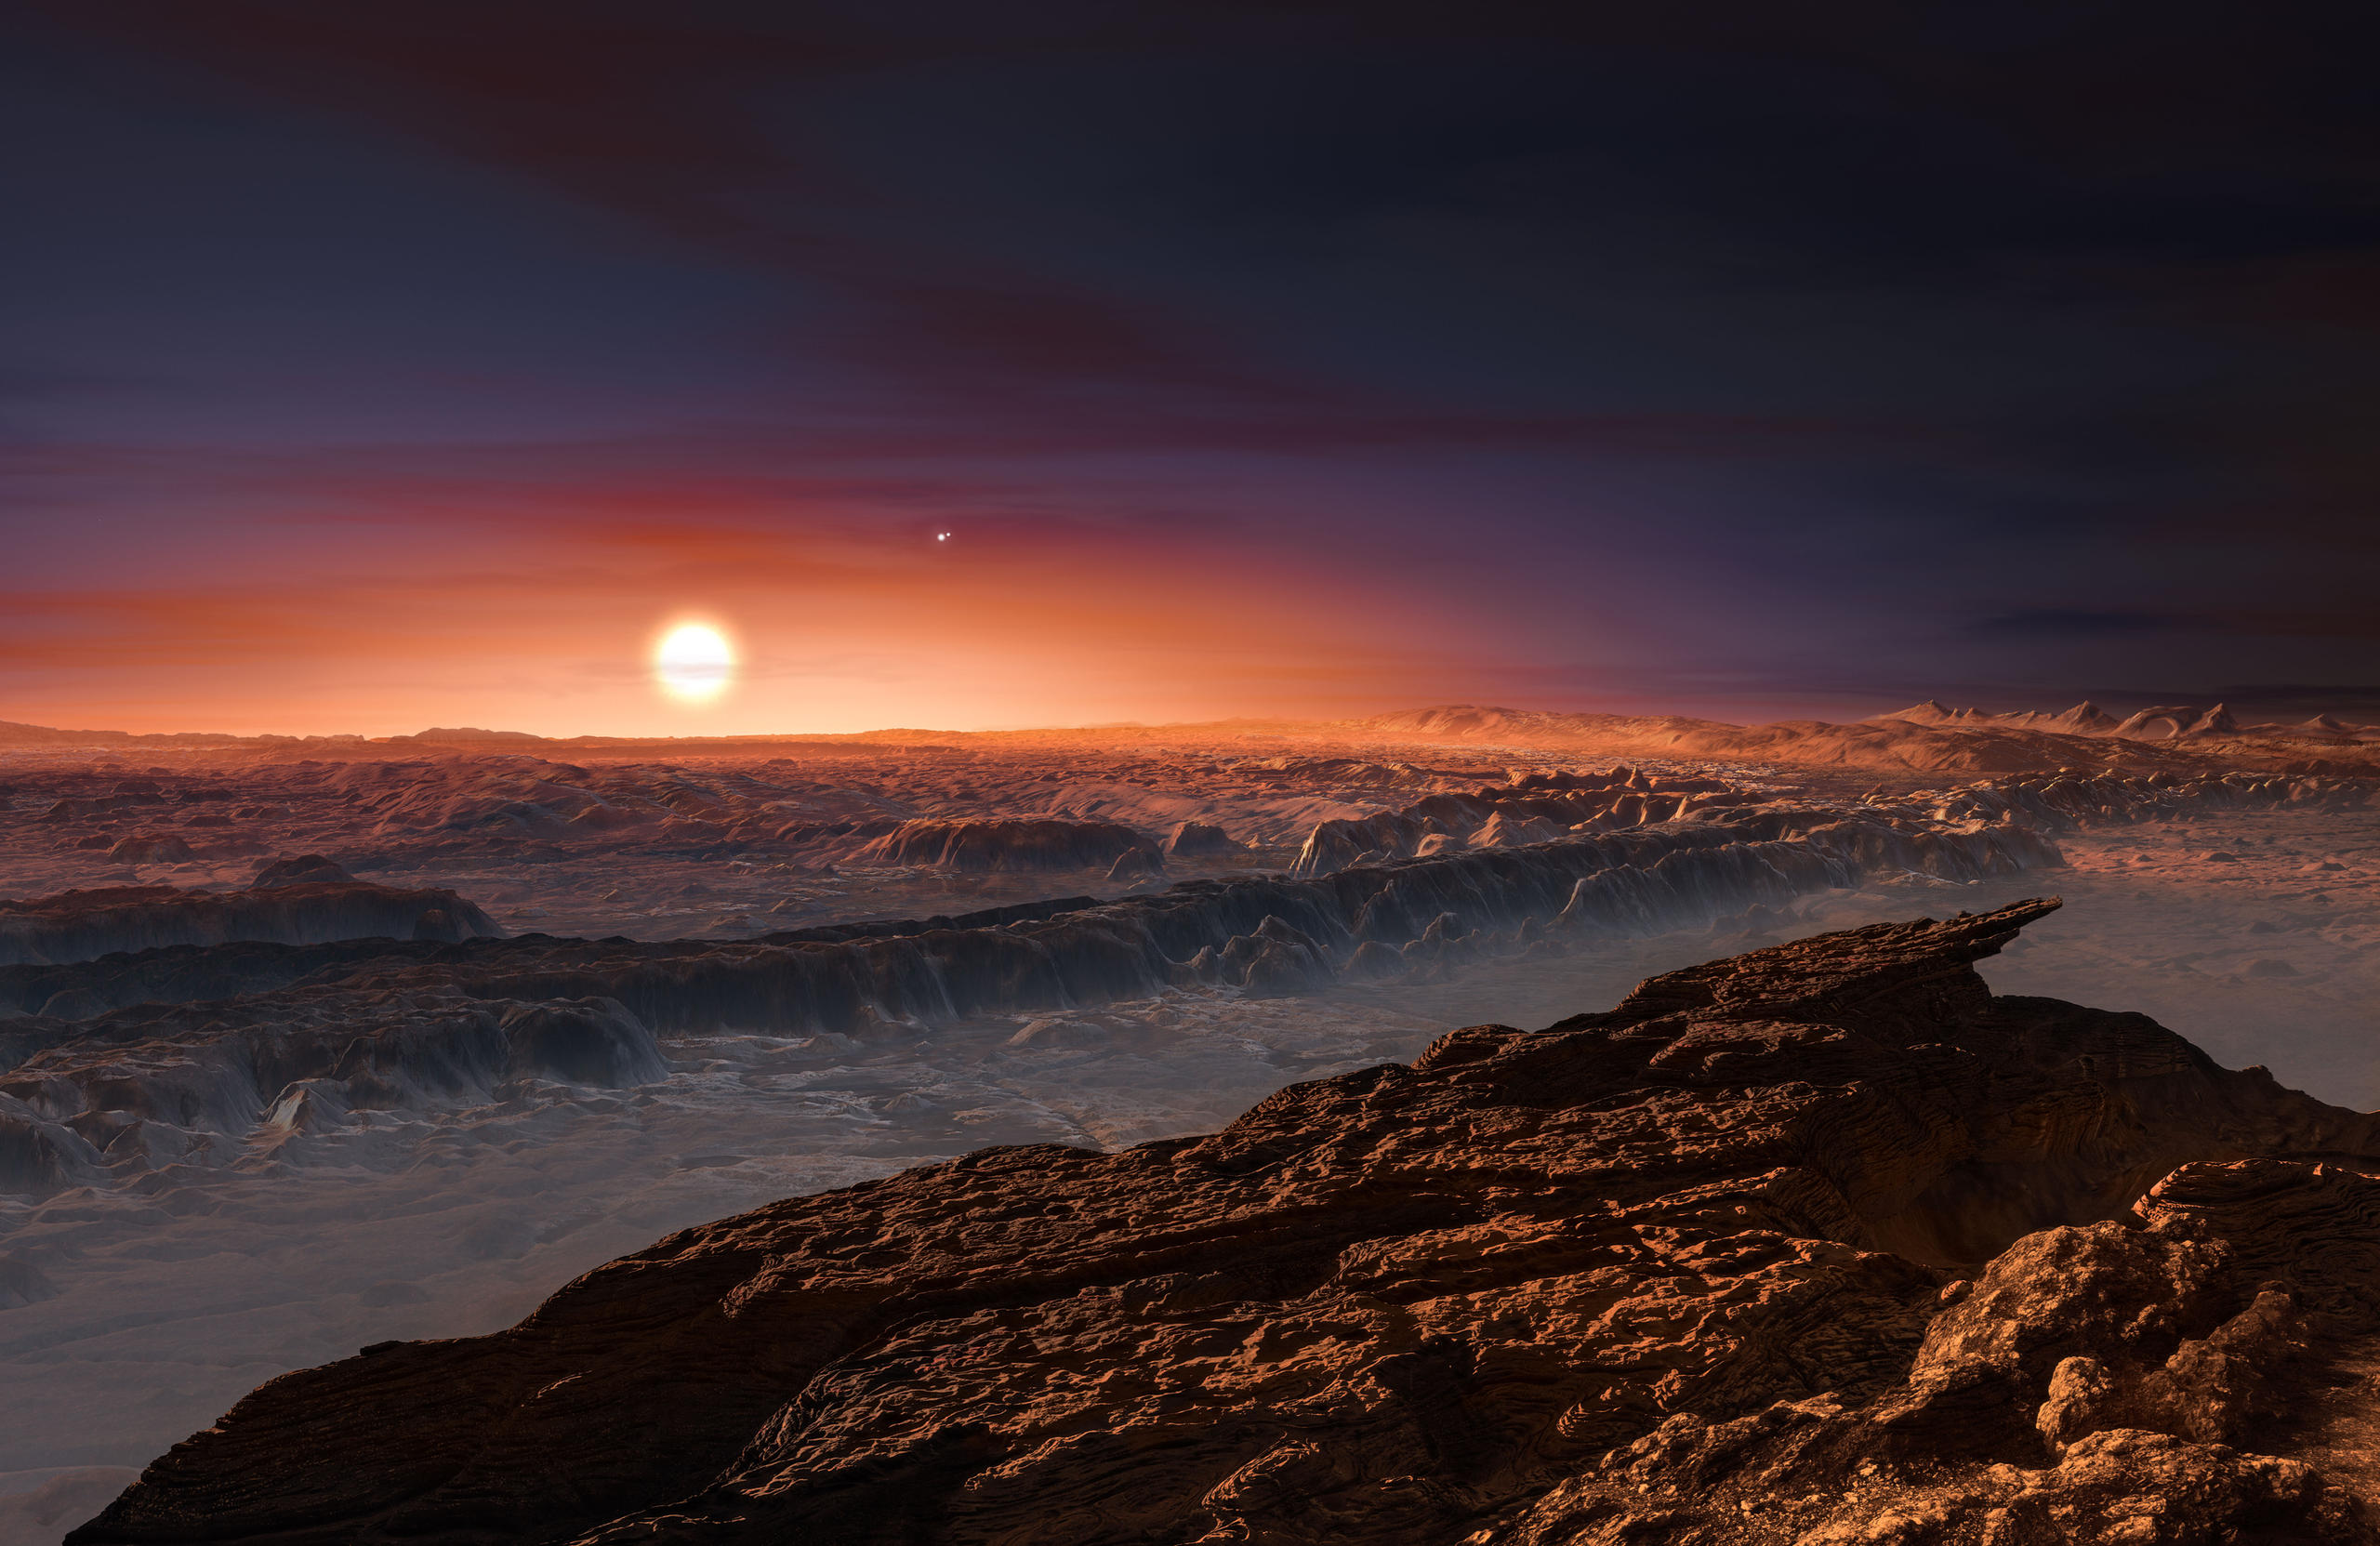 artist’s impression of the surface of the planet Proxima b